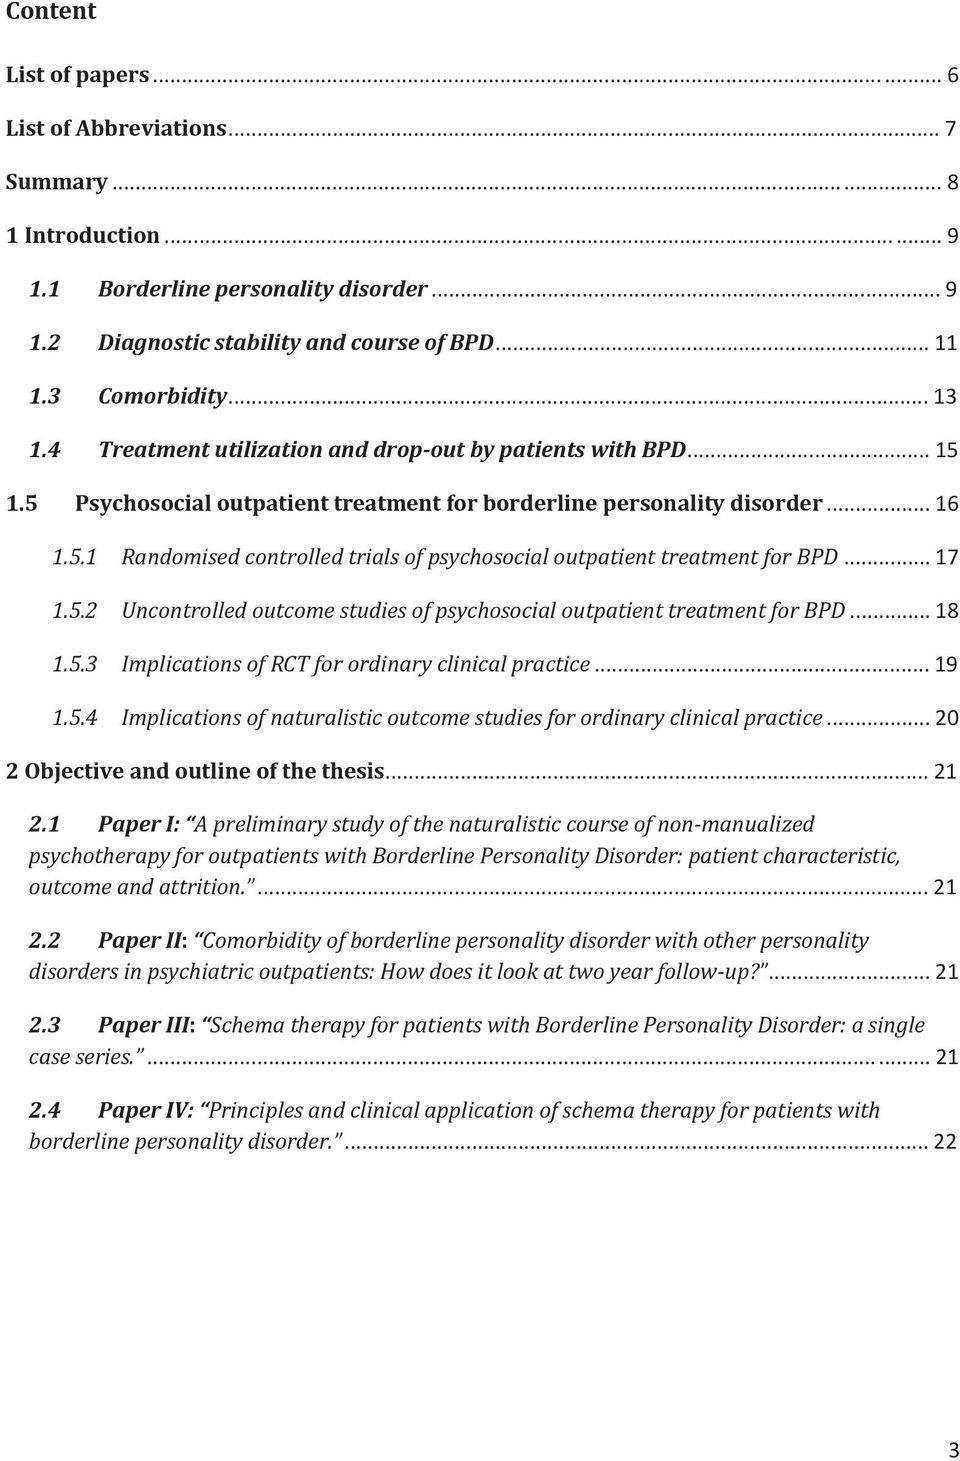 .. 17 1.5.2 Uncontrolled outcome studies of psychosocial outpatient treatment for BPD... 18 1.5.3 Implications of RCT for ordinary clinical practice... 19 1.5.4 Implications of naturalistic outcome studies for ordinary clinical practice.